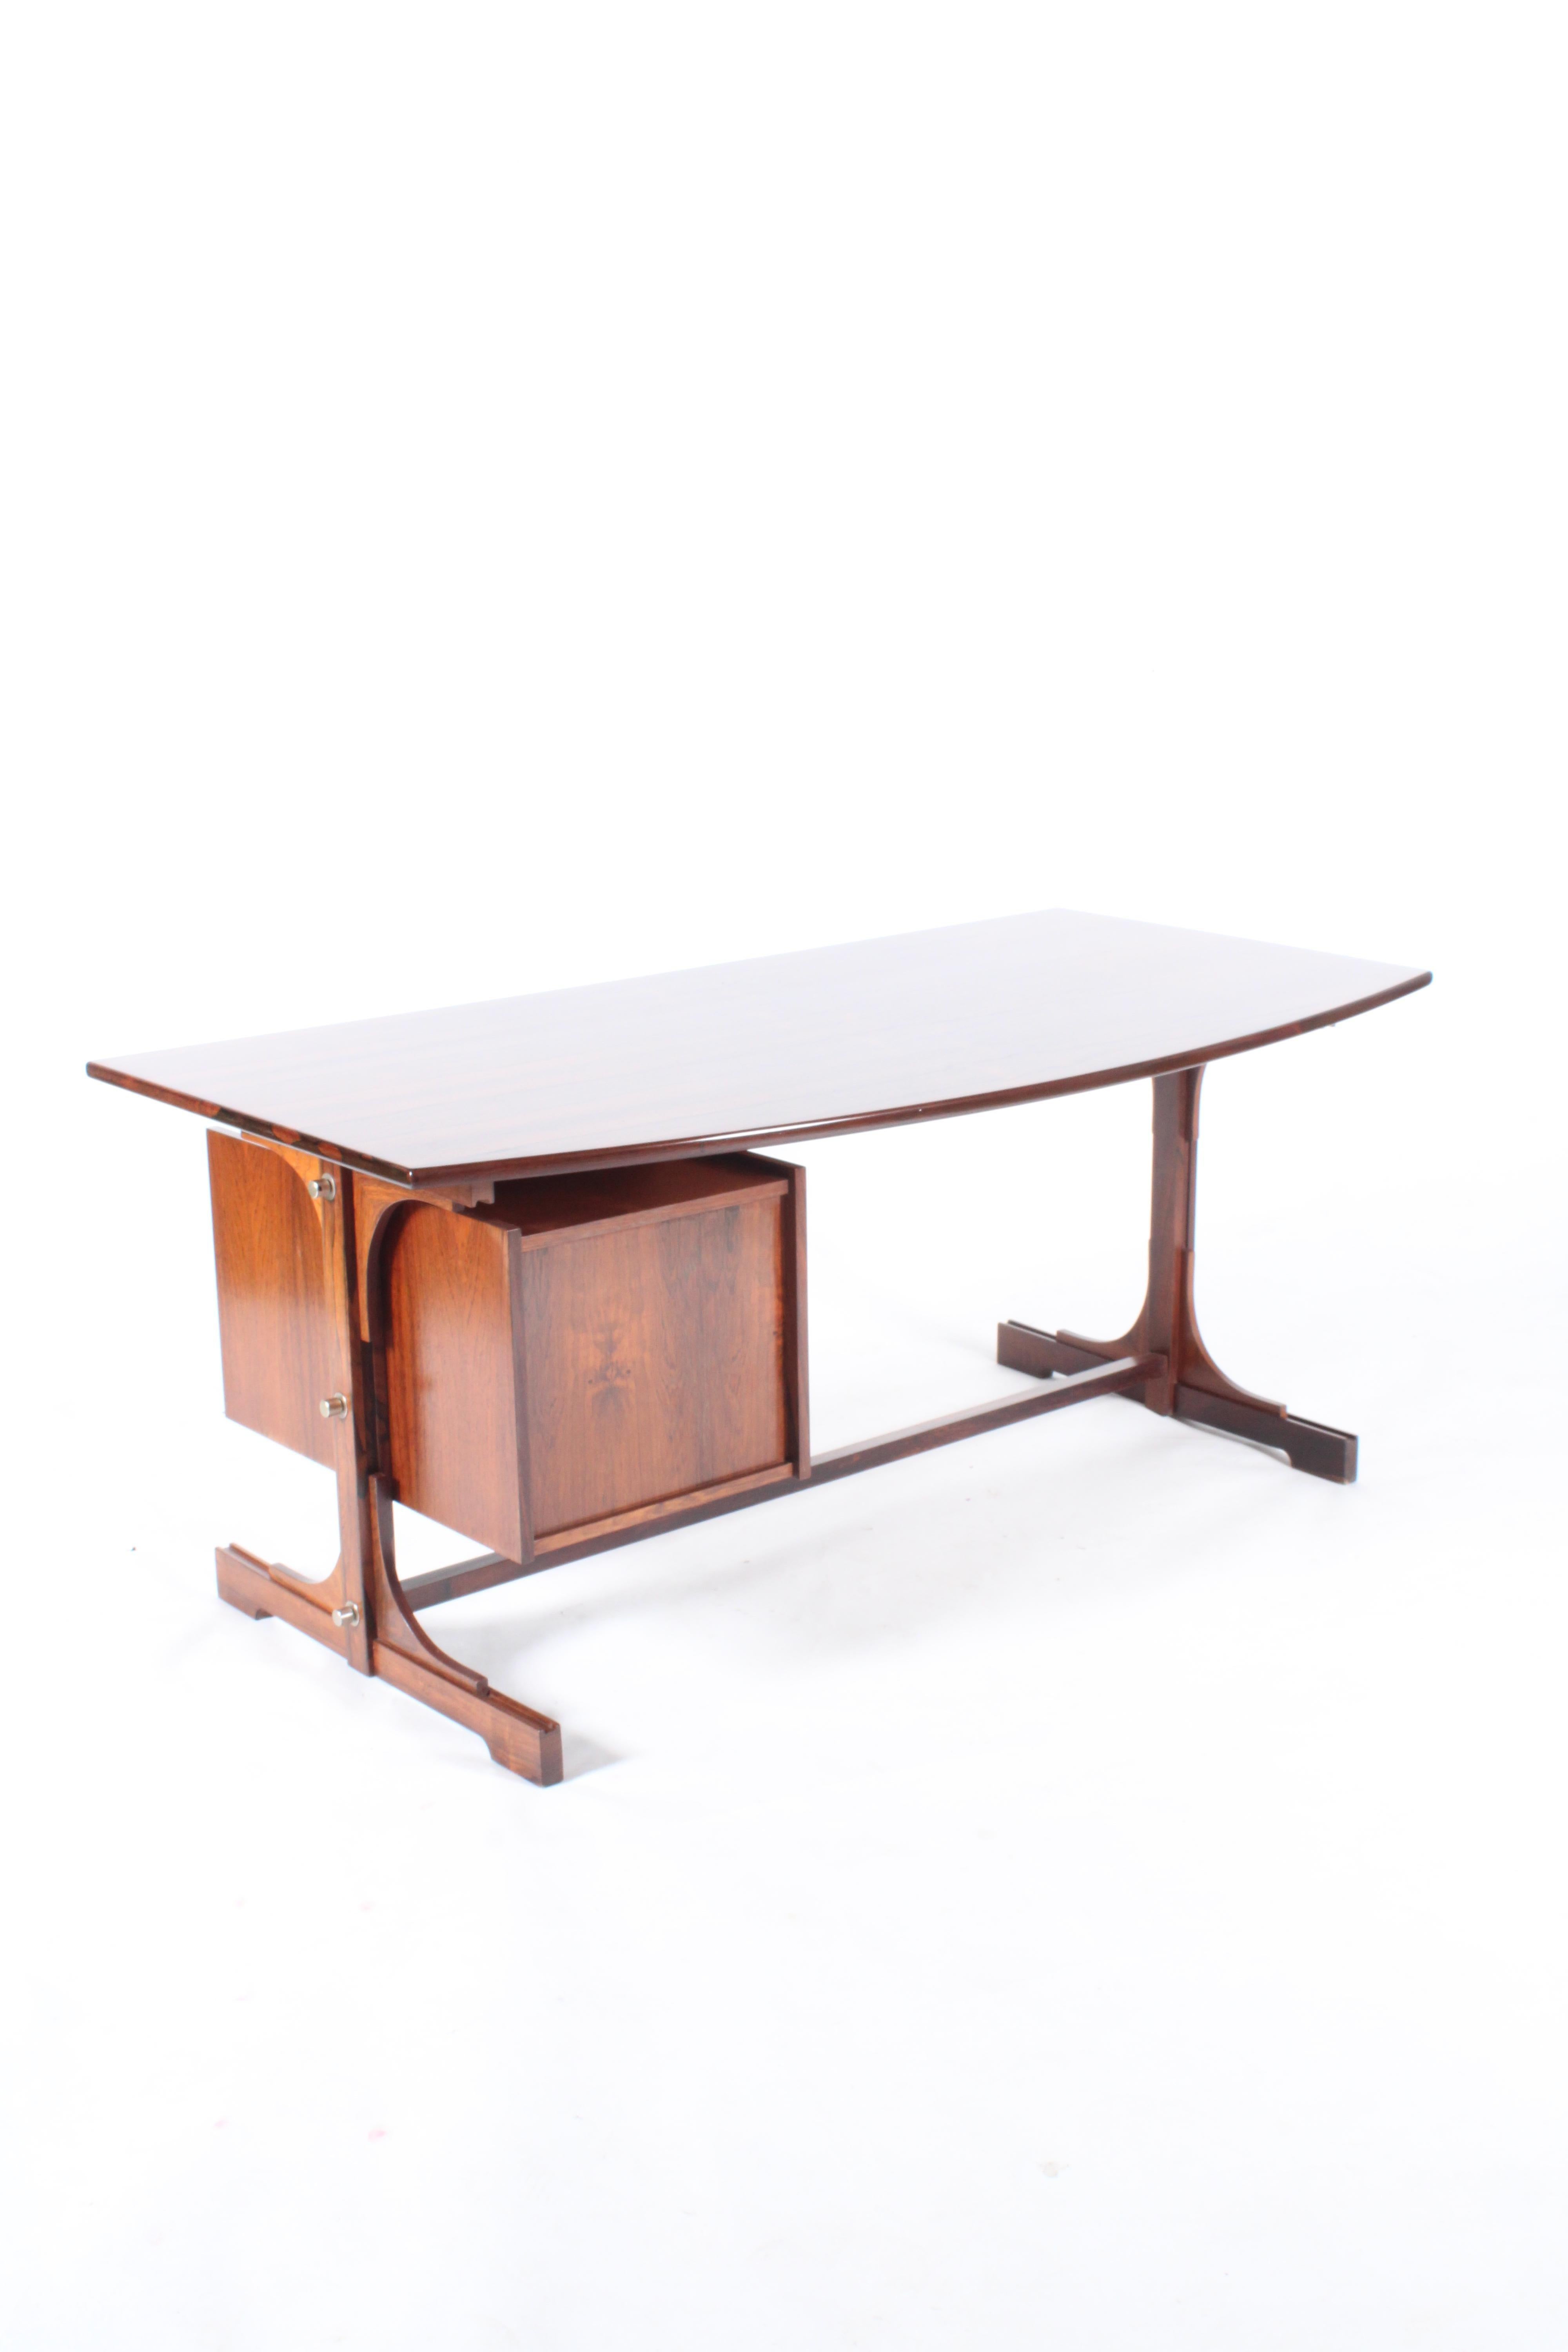 Hand-Crafted Incredible Mid Century Italian Curved Top Desk By Bernini  For Sale